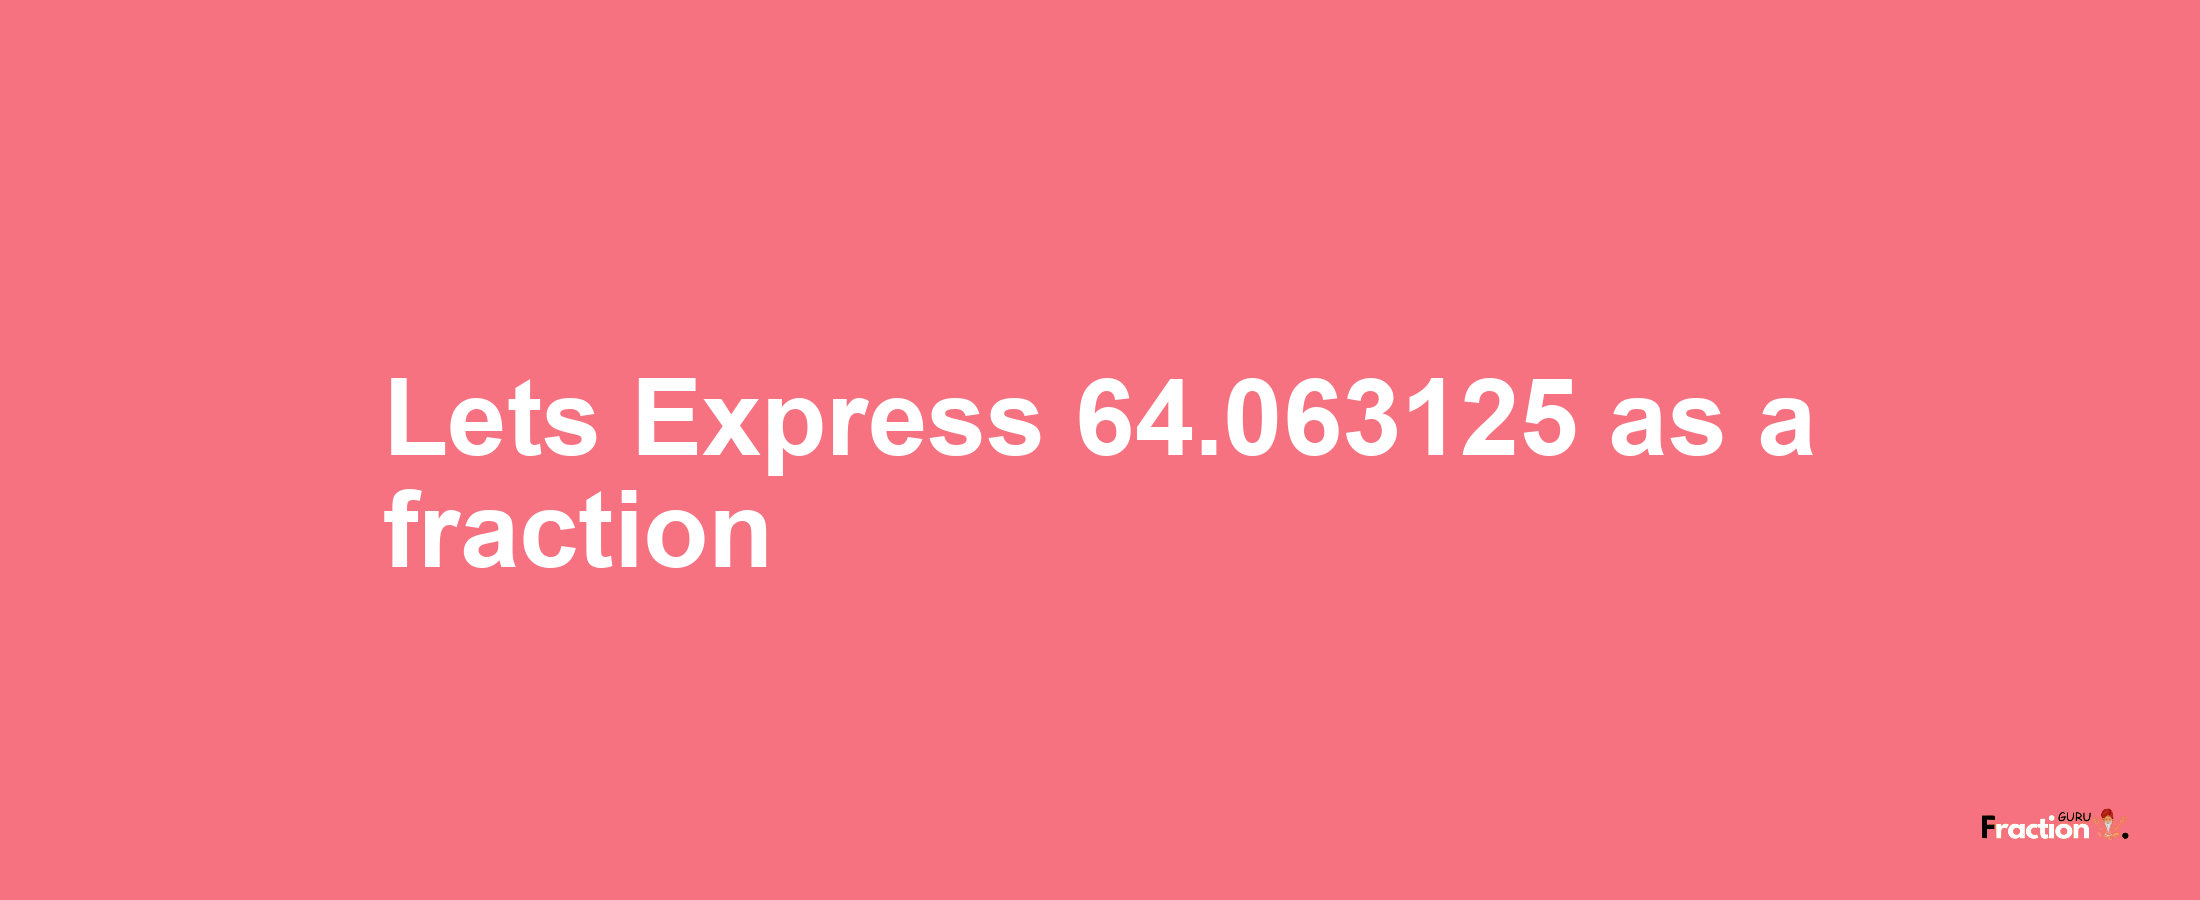 Lets Express 64.063125 as afraction